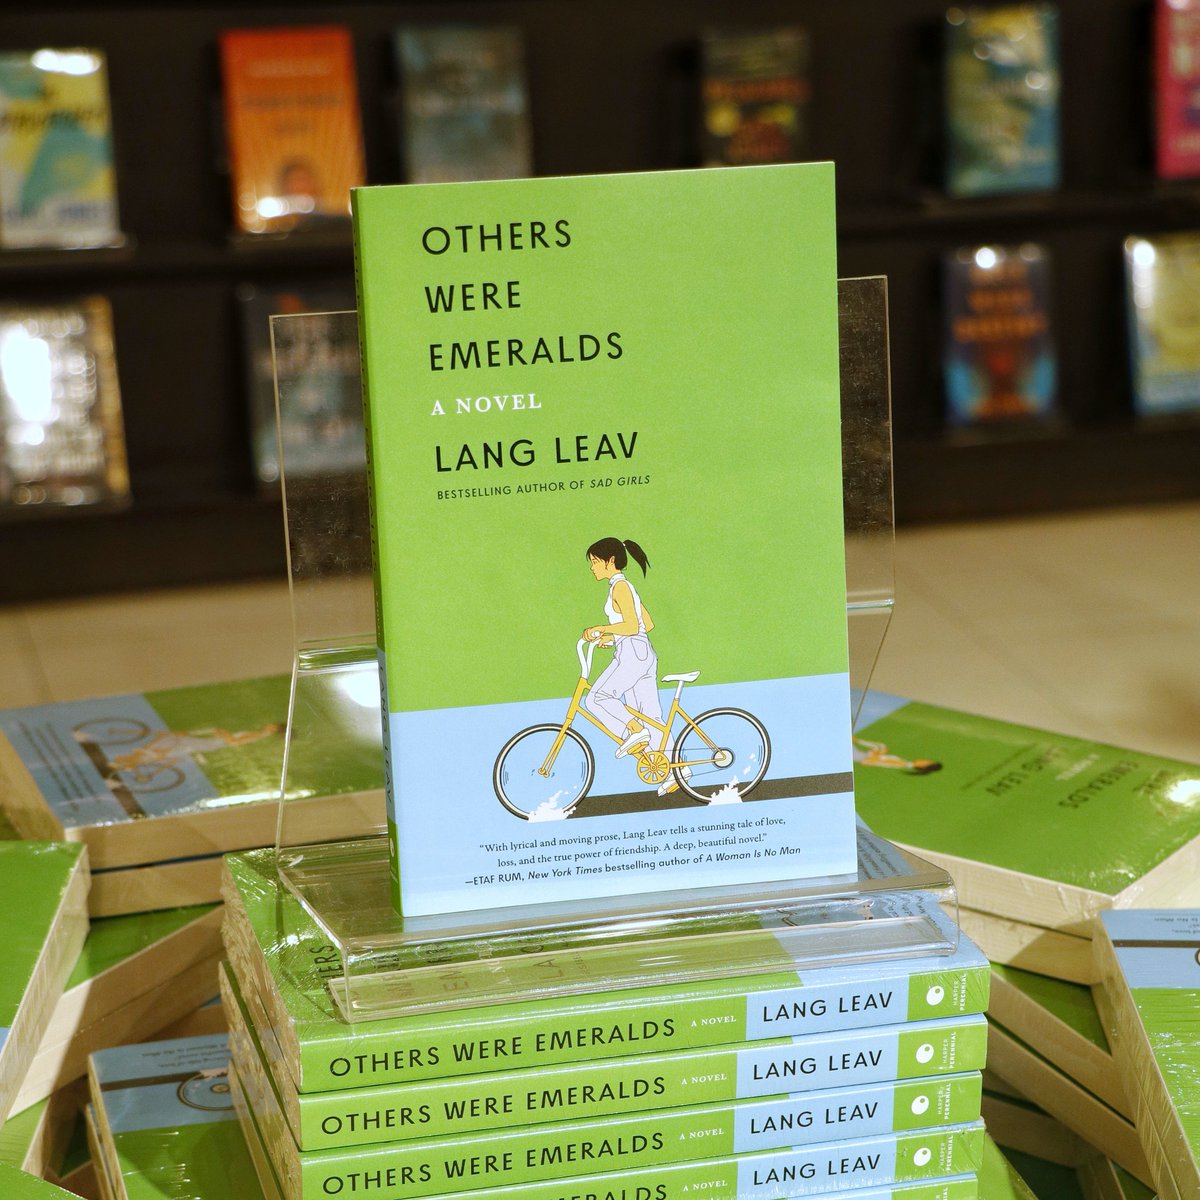 Experience warmth and nostalgia. Set in '90s Australia, it follows Ai, the daughter of Cambodian refugees, as she faces trauma and explores the power of loss, friendship, and love. Get Others Were Emeralds at any Fully Booked branches or fullybookedonline.com 💚